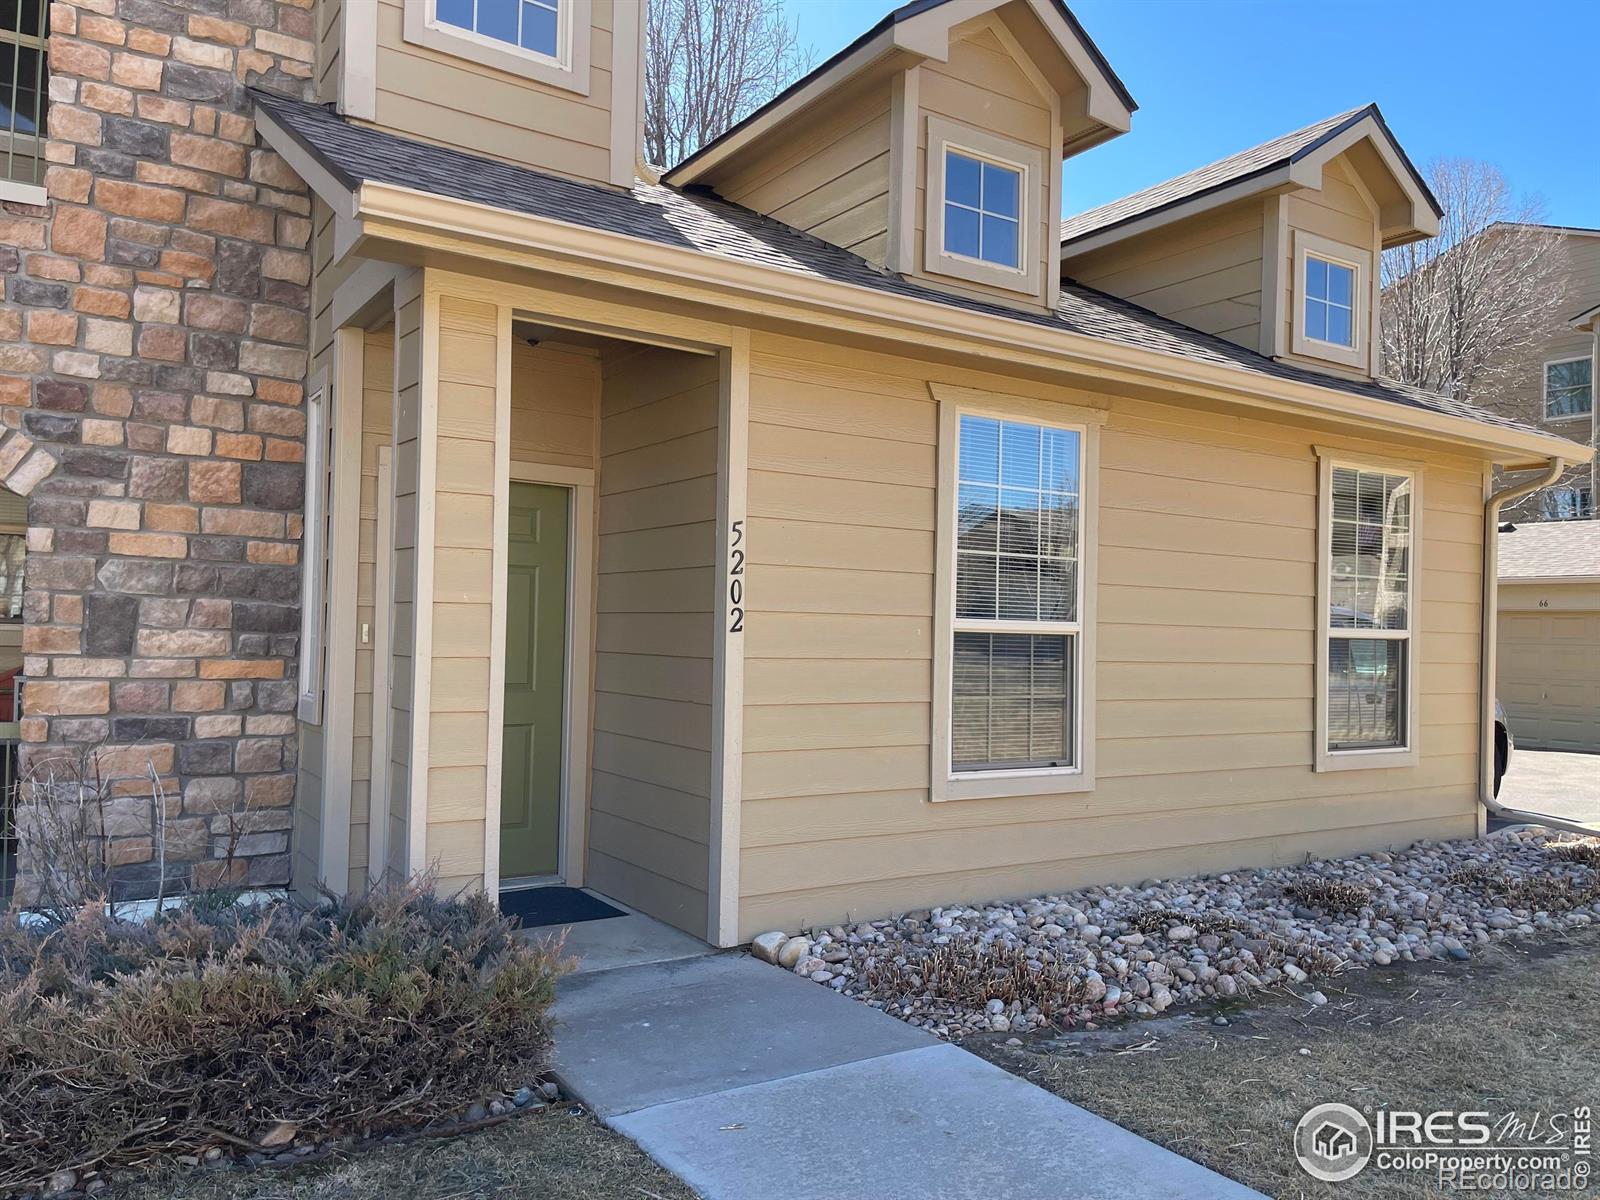 5620  Fossil Creek Parkway, fort collins  House Search MLS Picture